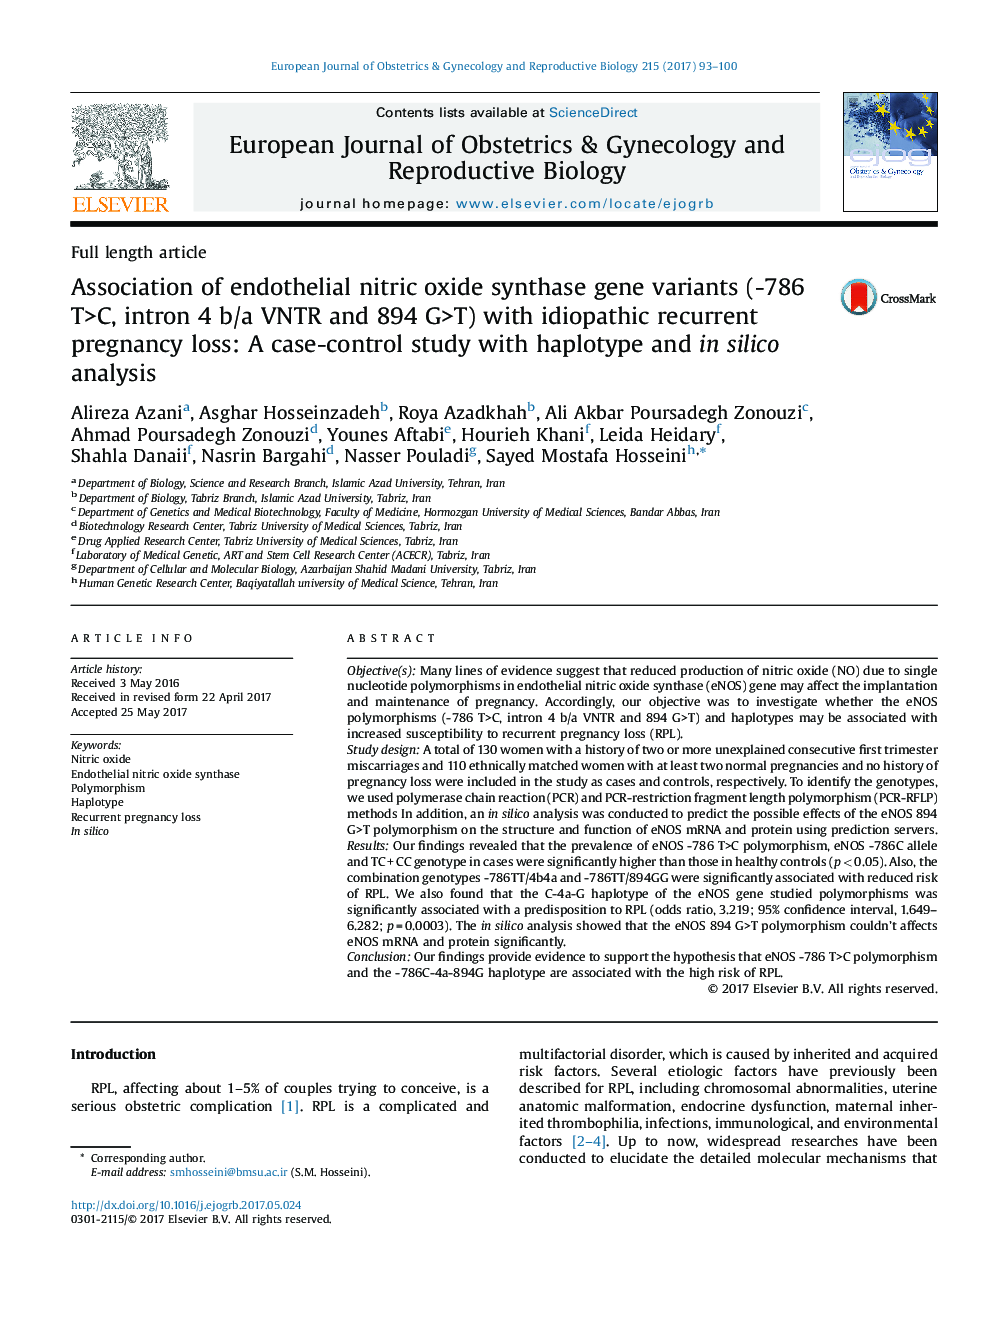 Association of endothelial nitric oxide synthase gene variants (-786 T>C, intron 4 b/a VNTR and 894 G>T) with idiopathic recurrent pregnancy loss: A case-control study with haplotype and in silico analysis